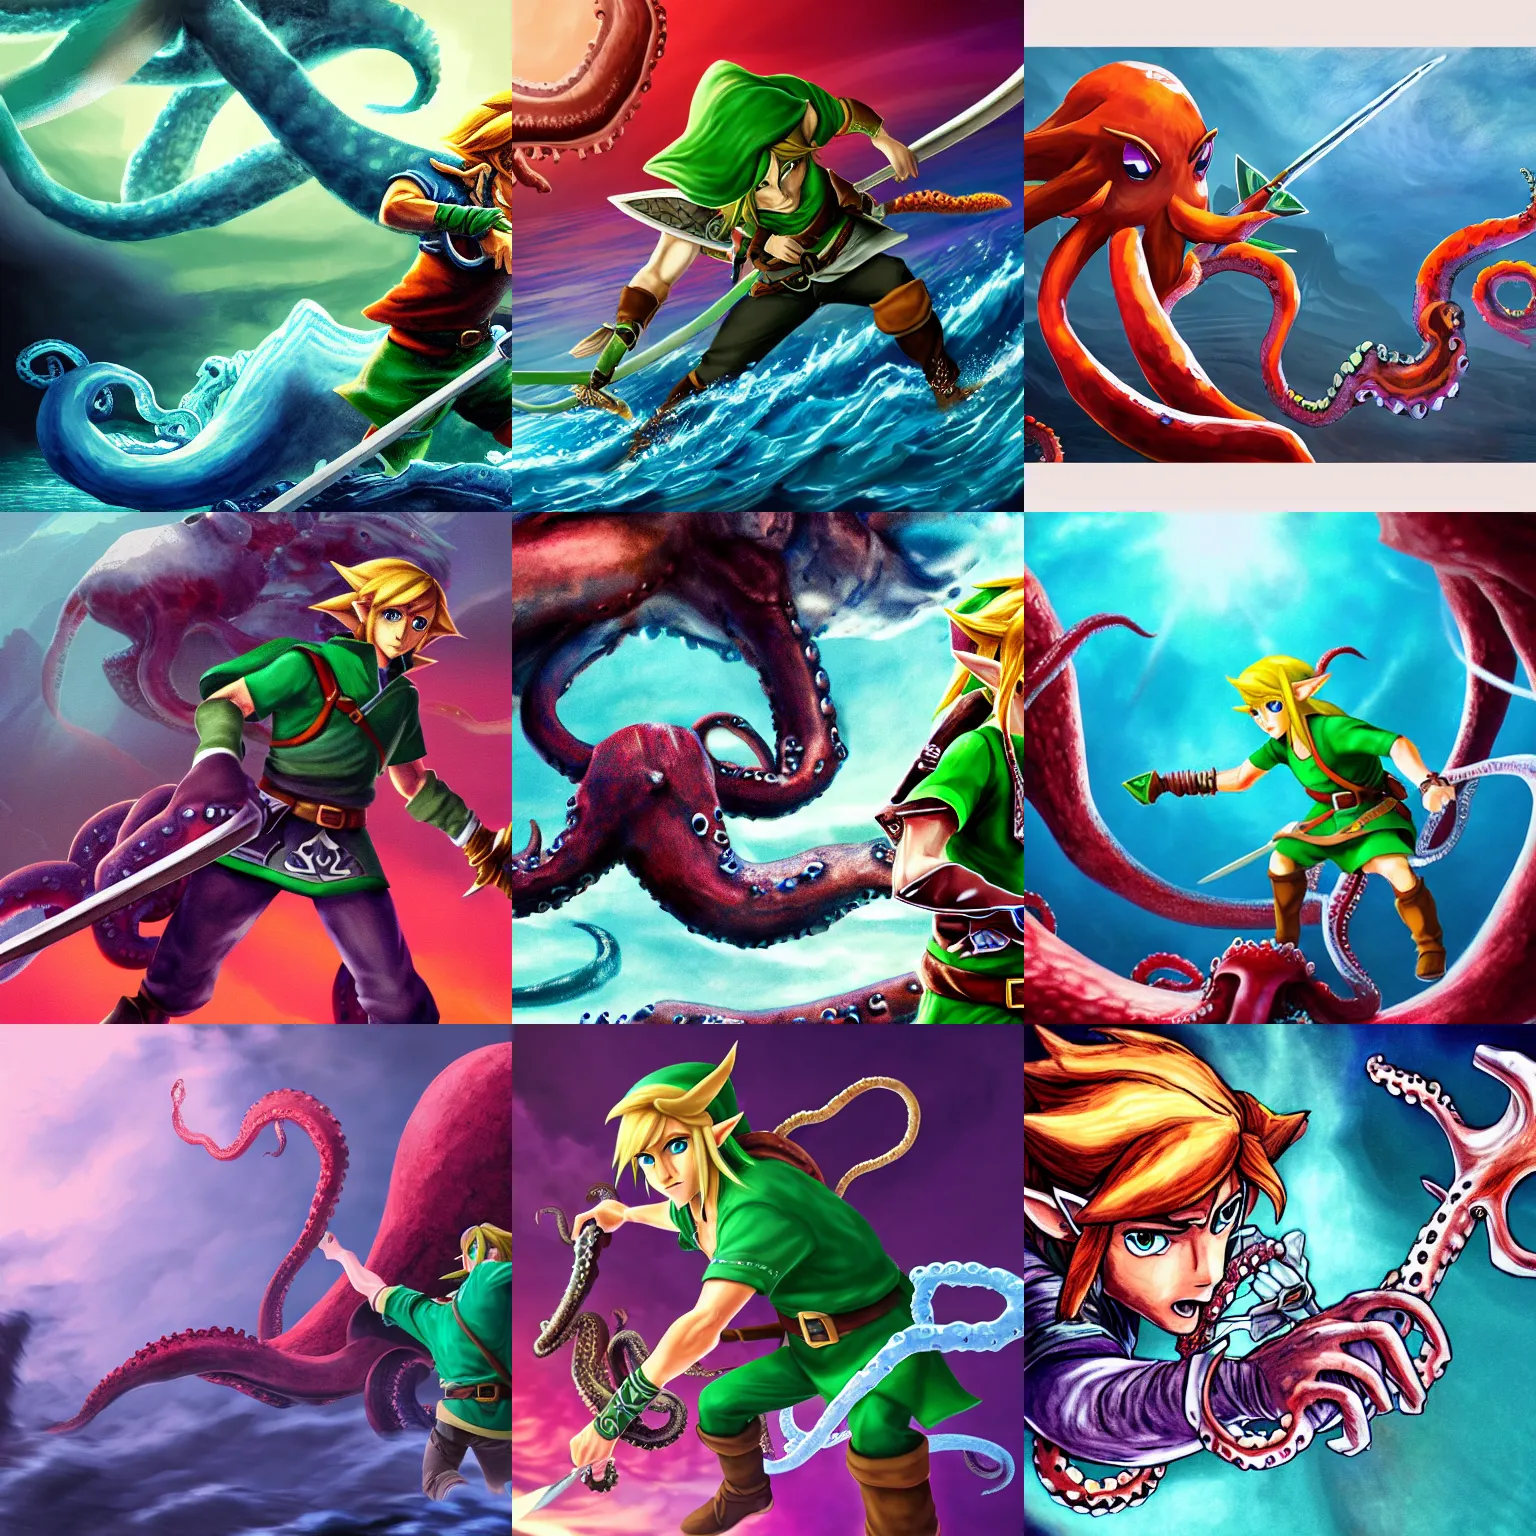 Prompt: detailed image of link from legend of zelda fighting a giant octopus, rich deep colors, cinematic